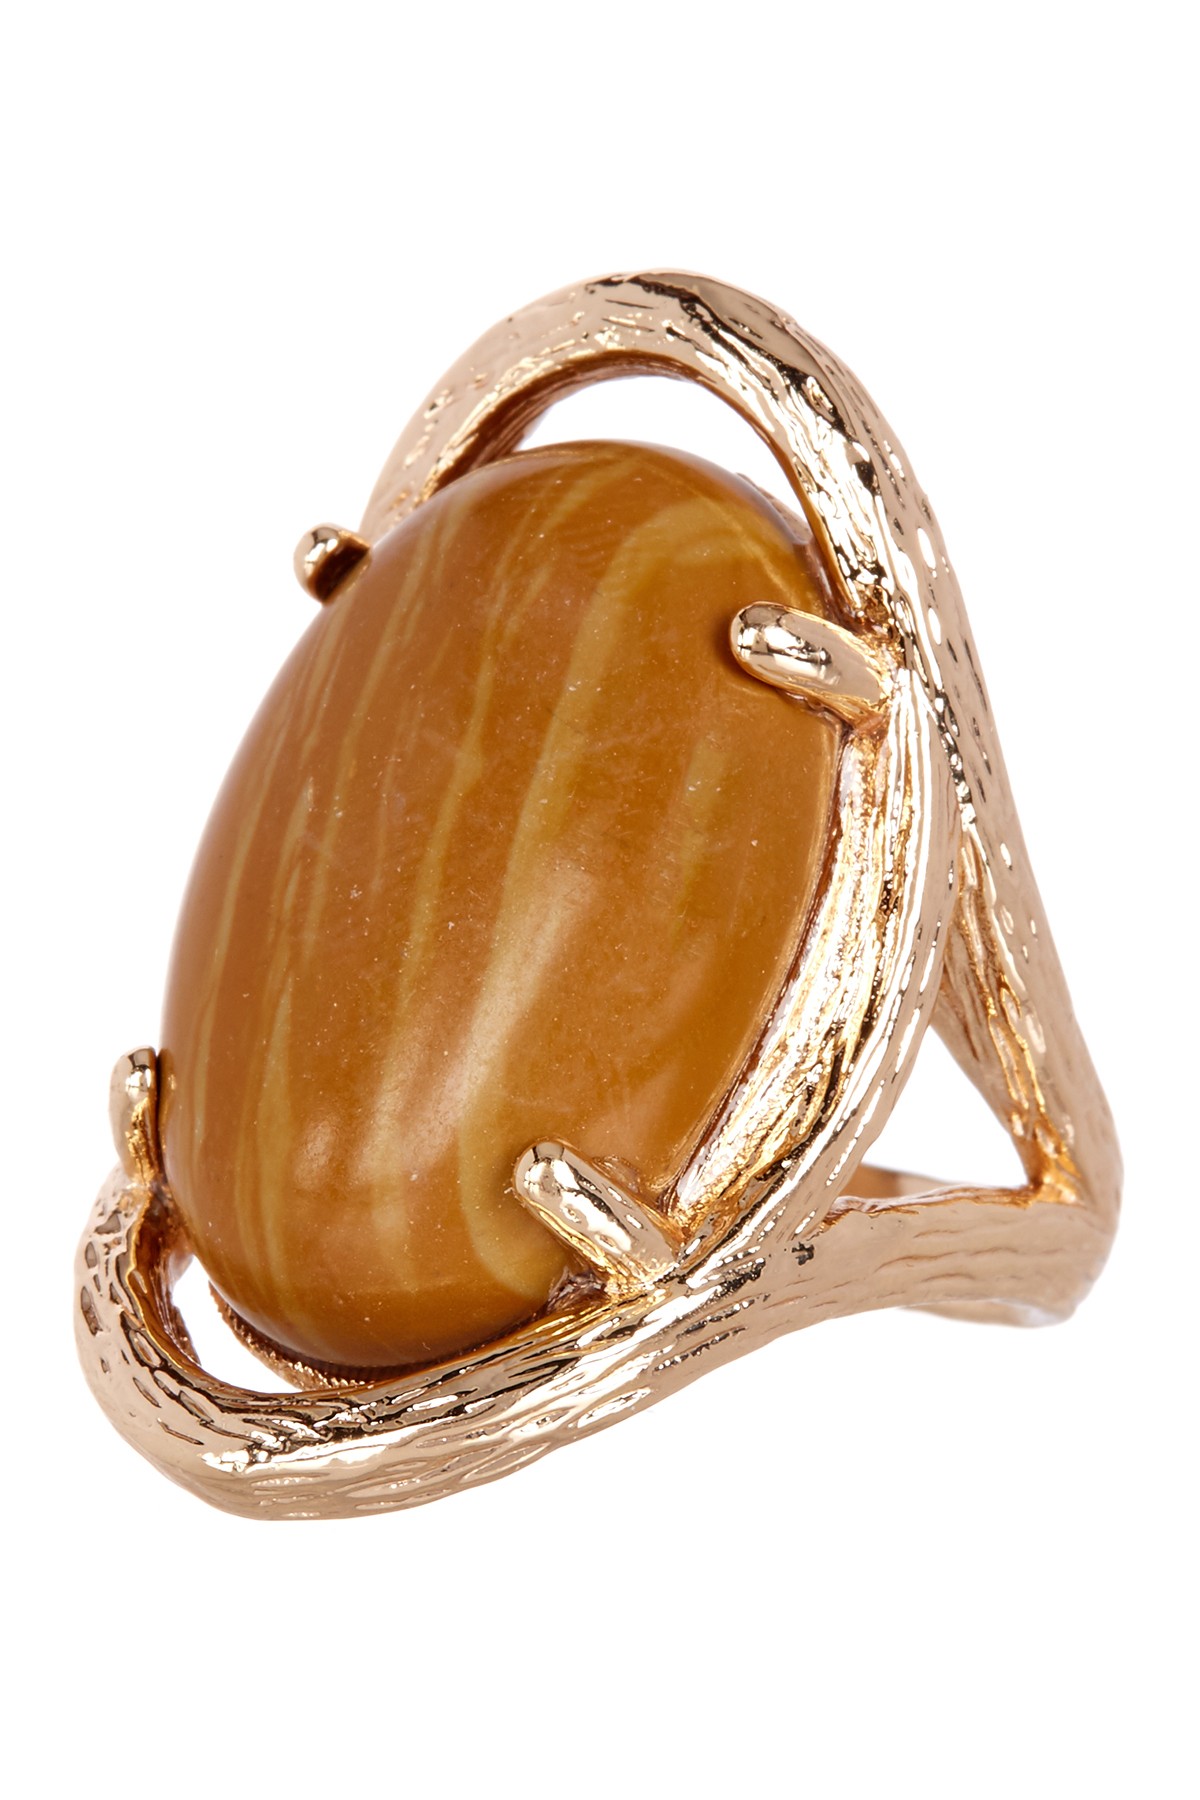 METAL AND STONE | Cabochon Oval Brown Stone Textured Ring - Size 7 ...